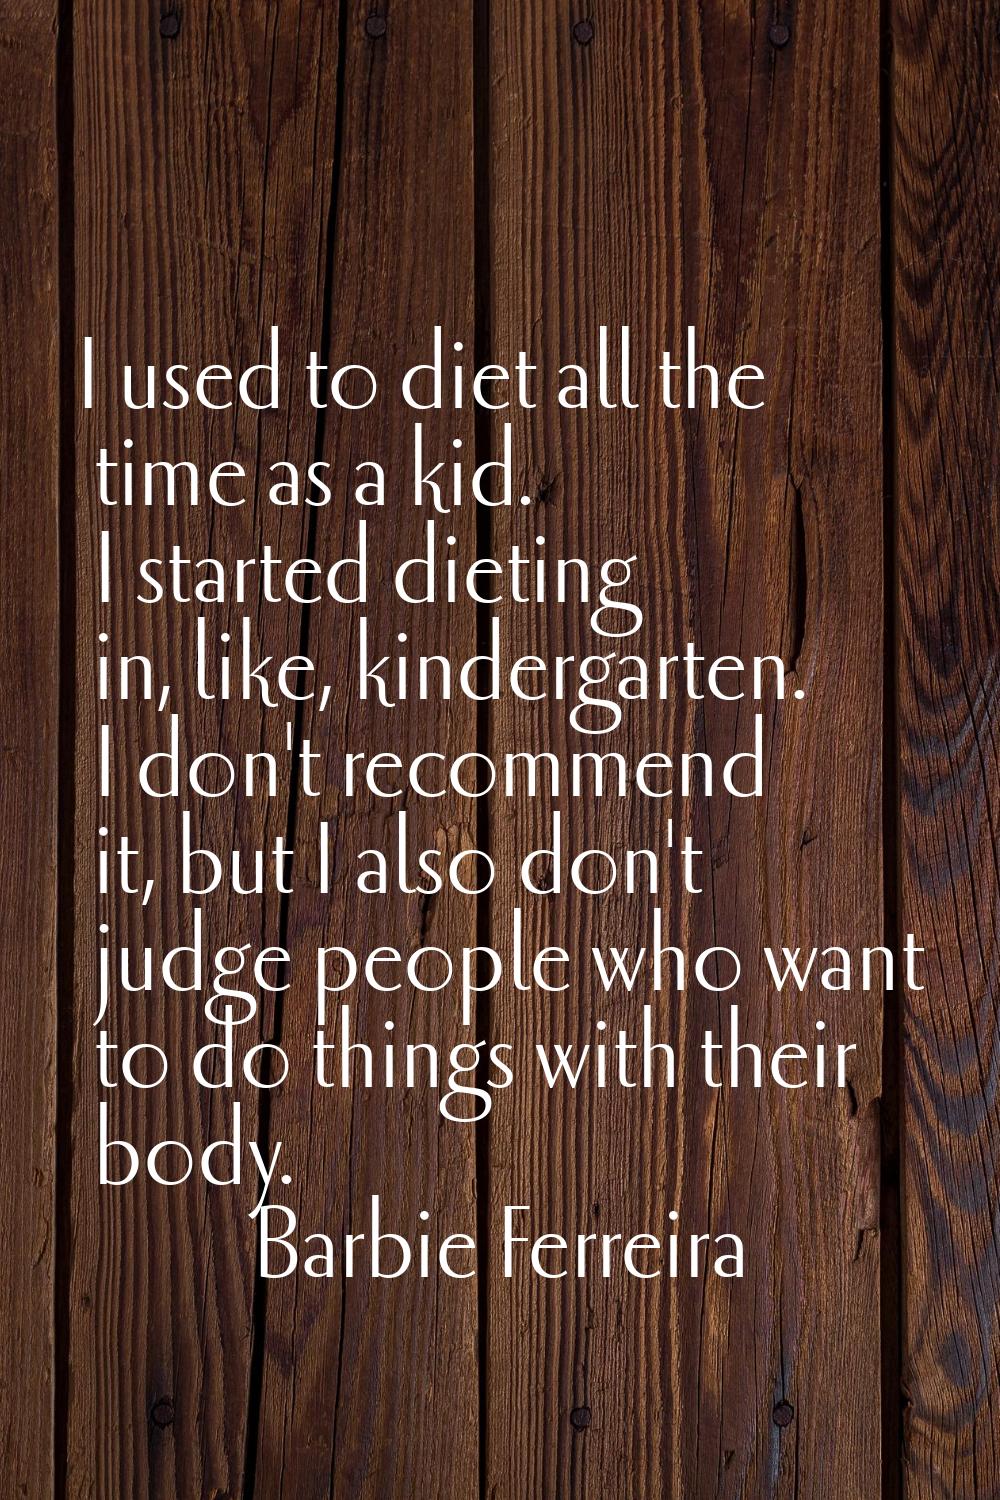 I used to diet all the time as a kid. I started dieting in, like, kindergarten. I don't recommend i